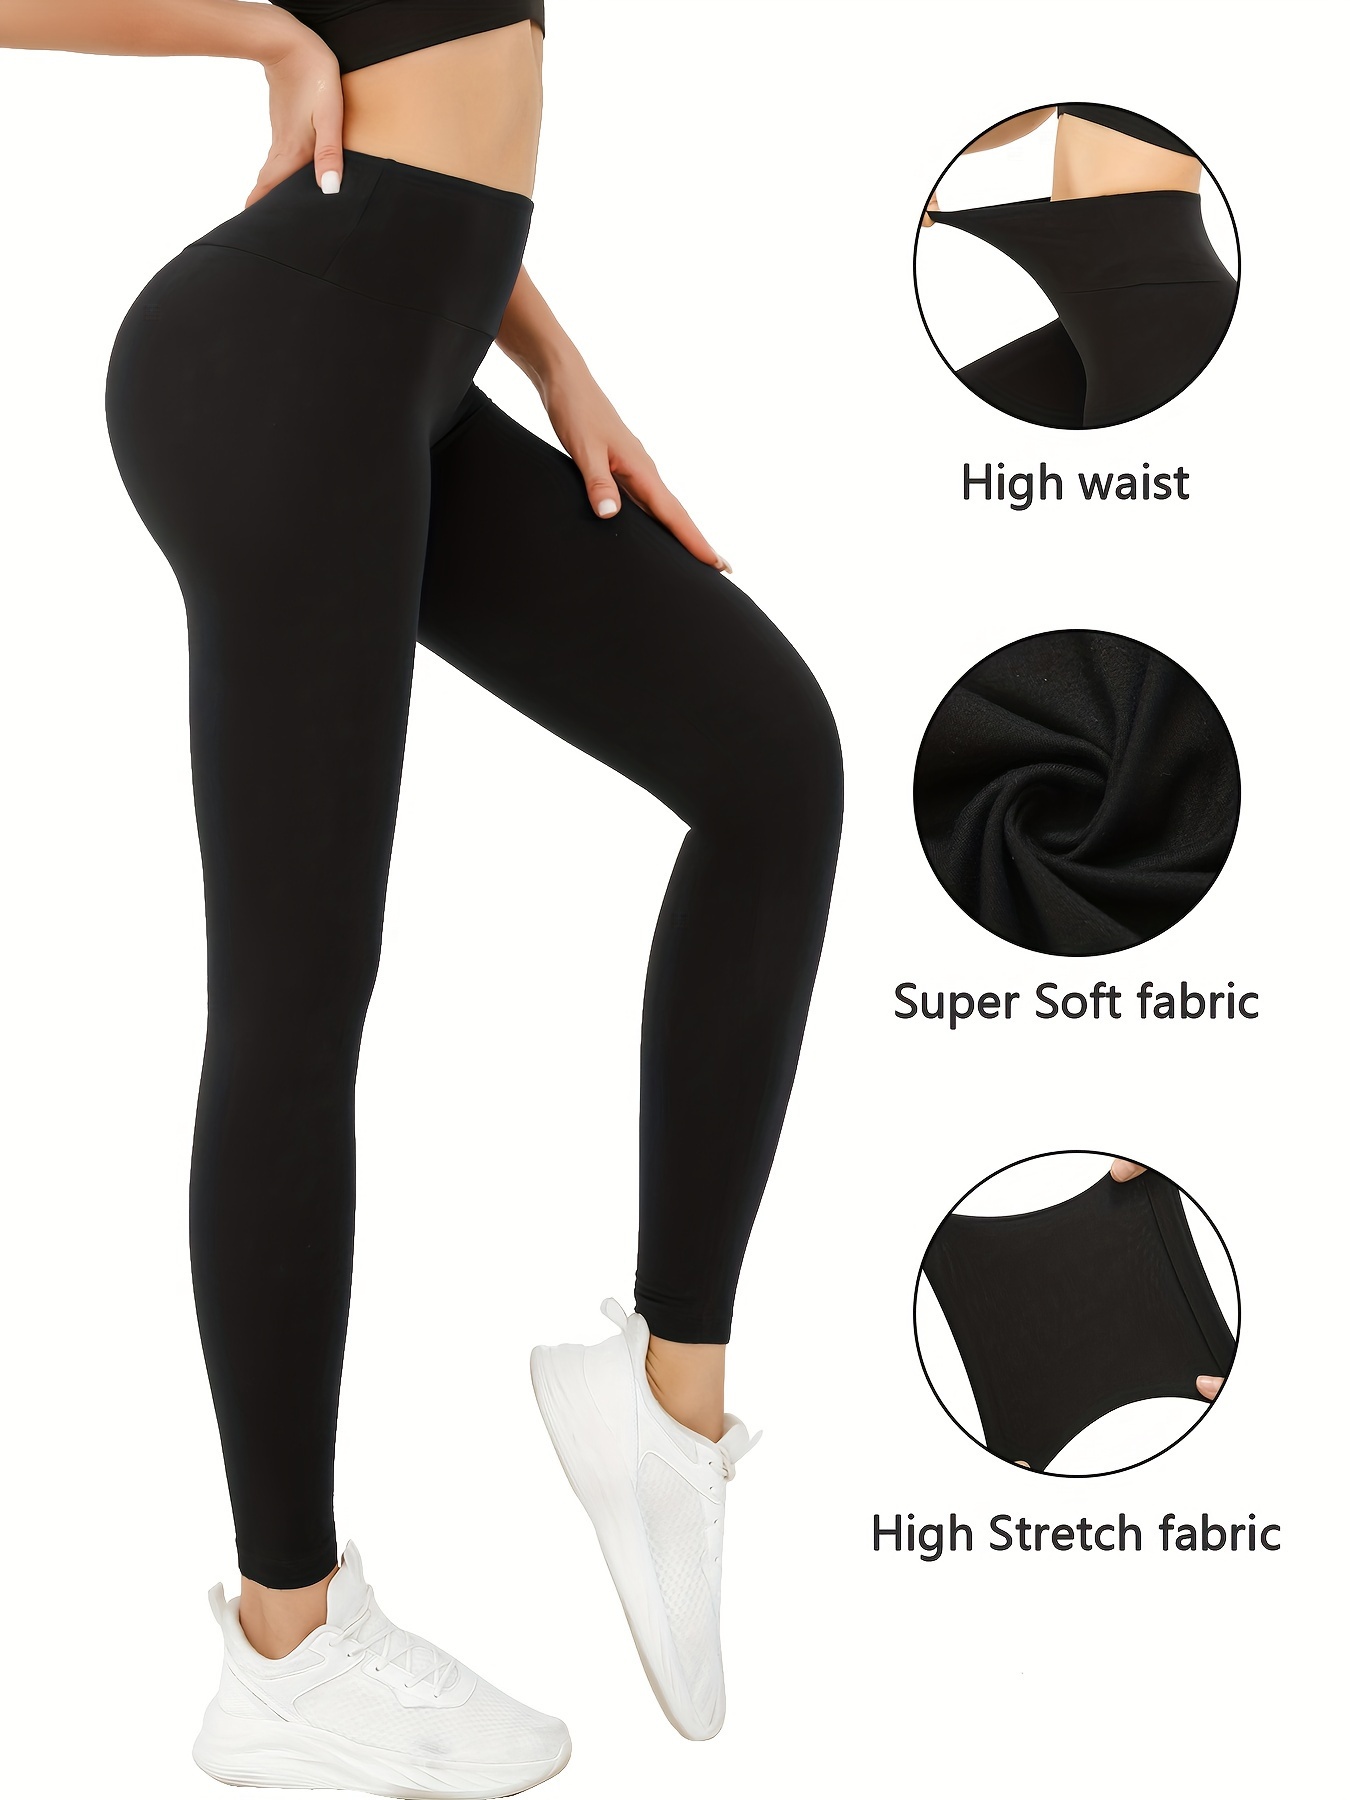 Womens Soft Stretch Cotton High Waisted Leggings Long Workout Yoga